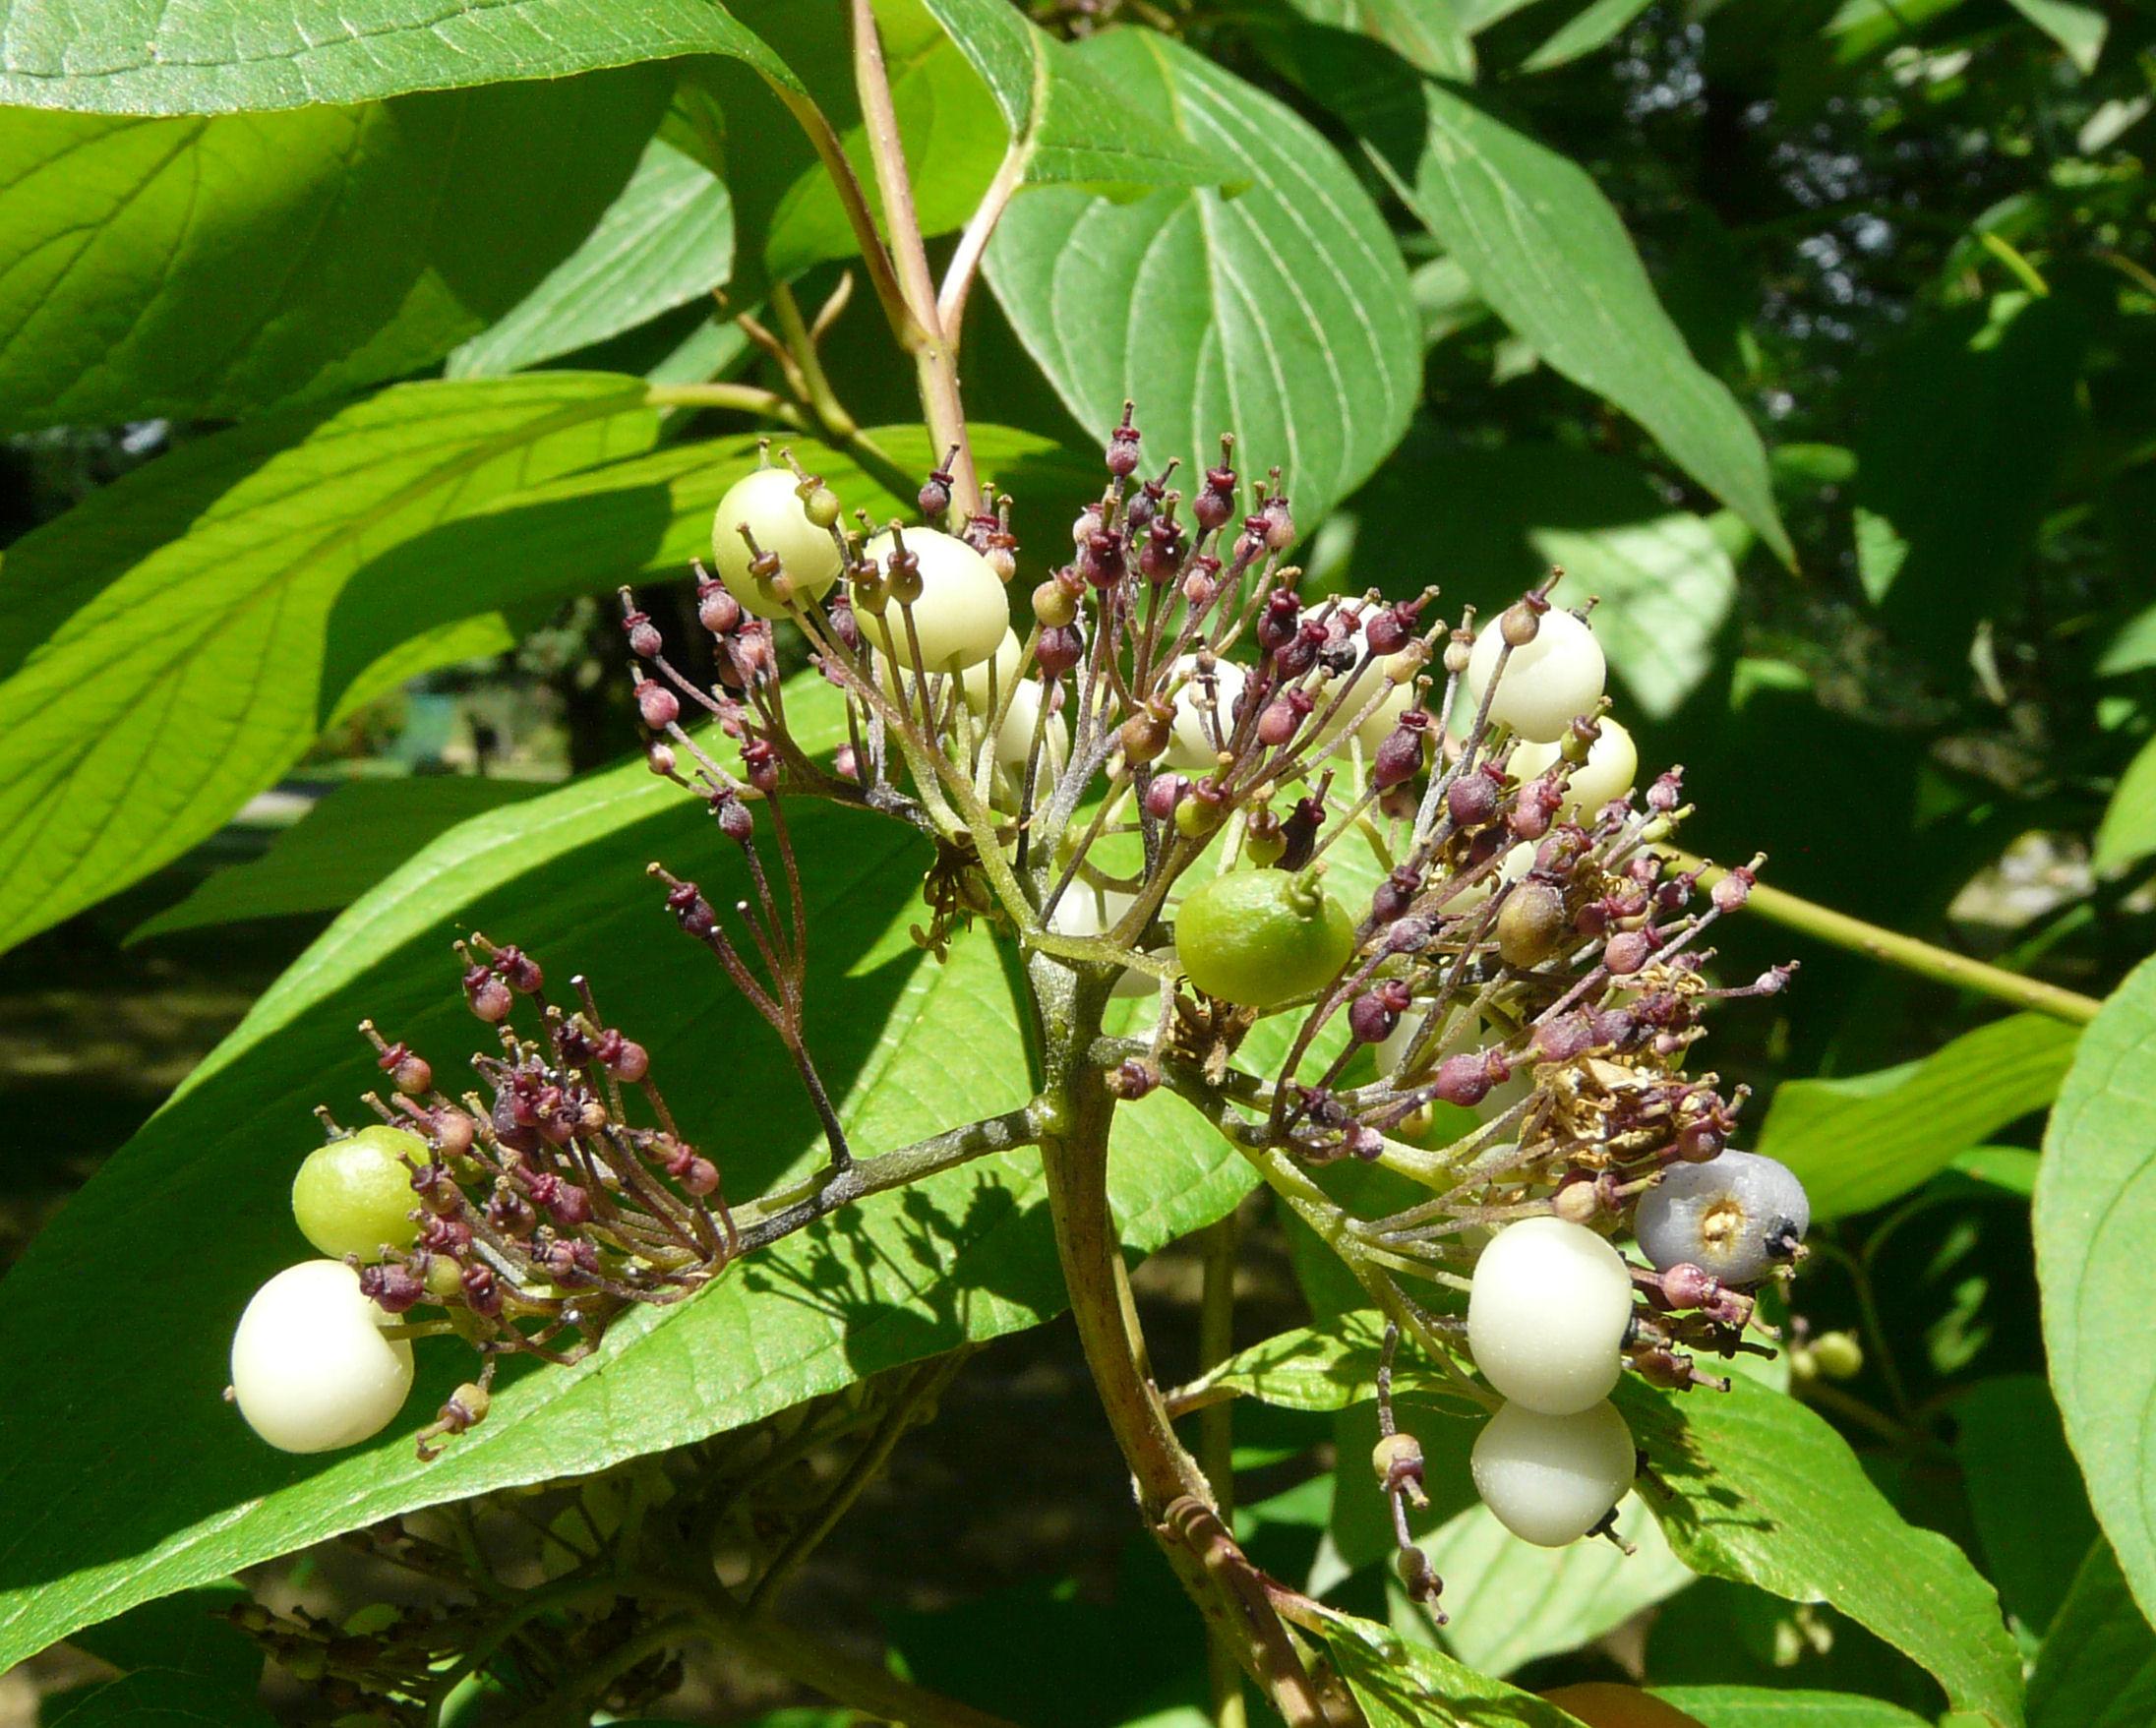 white-lime fruits with burgundy-purple buds, lime-green leaves and beige-green stems